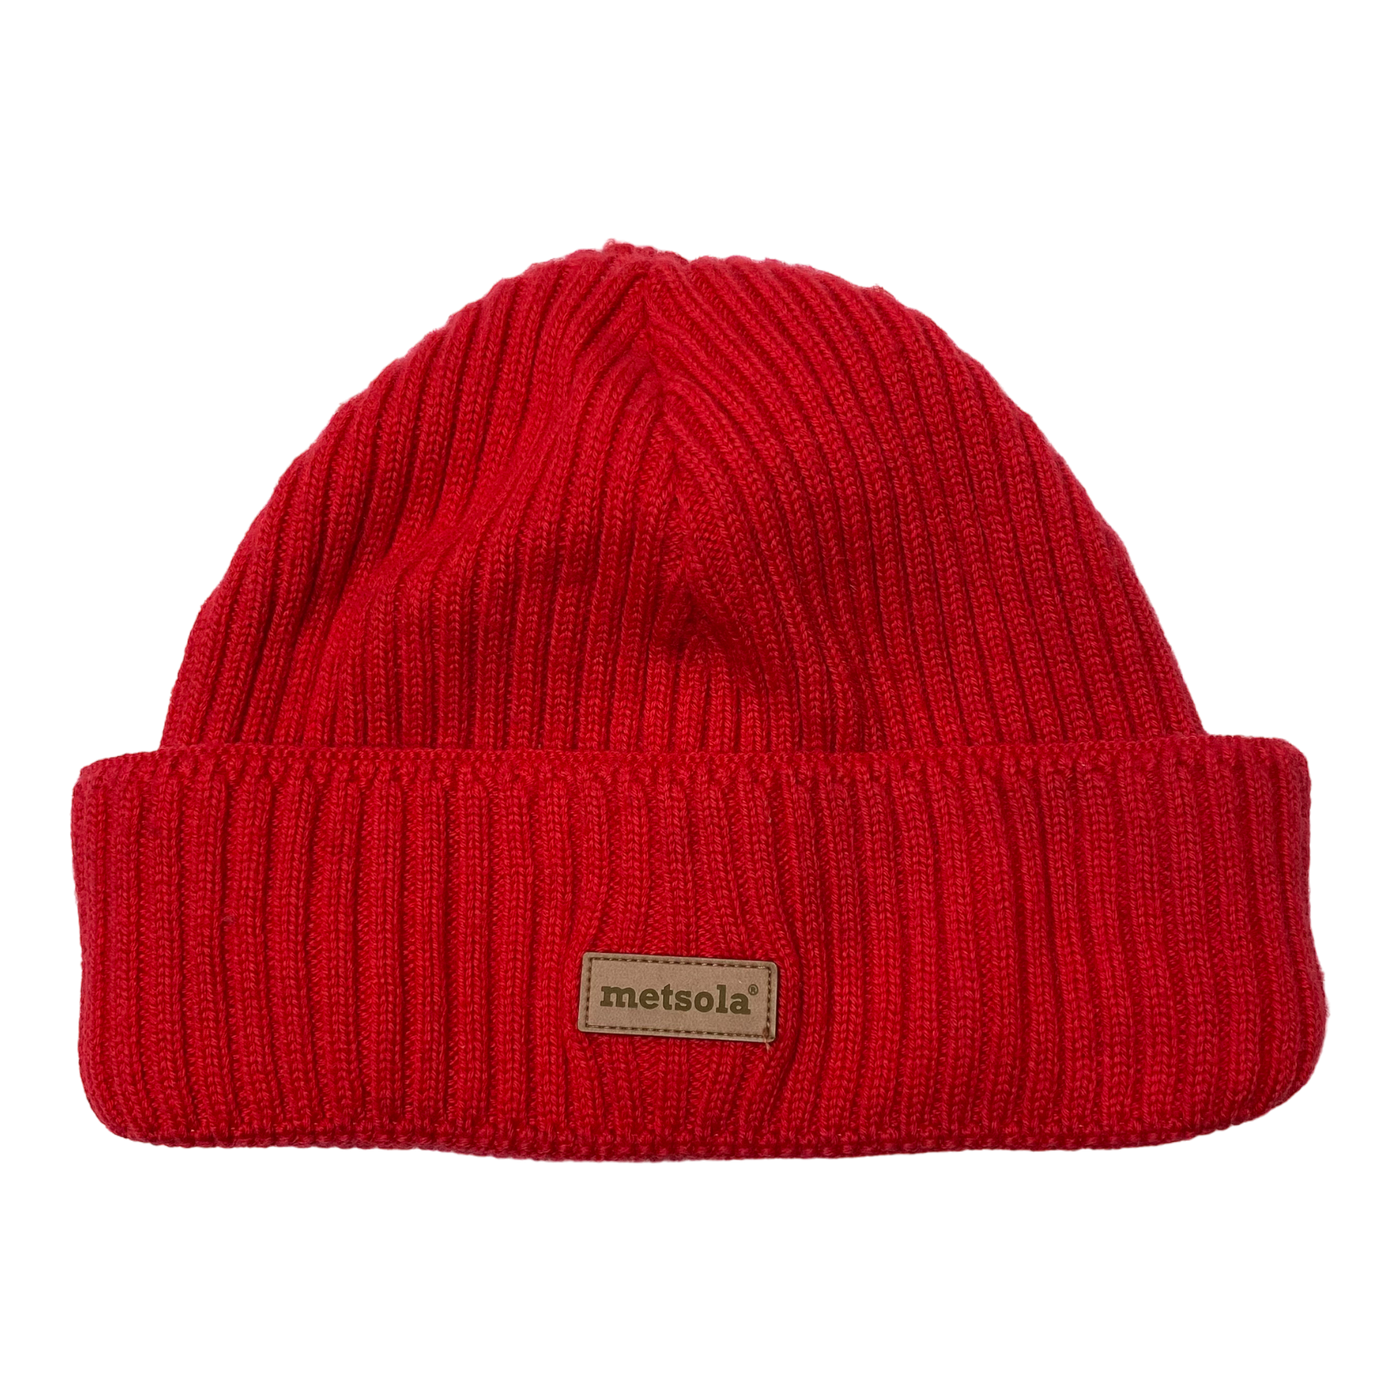 Metsola knitted merino beanie, red | 6-8y